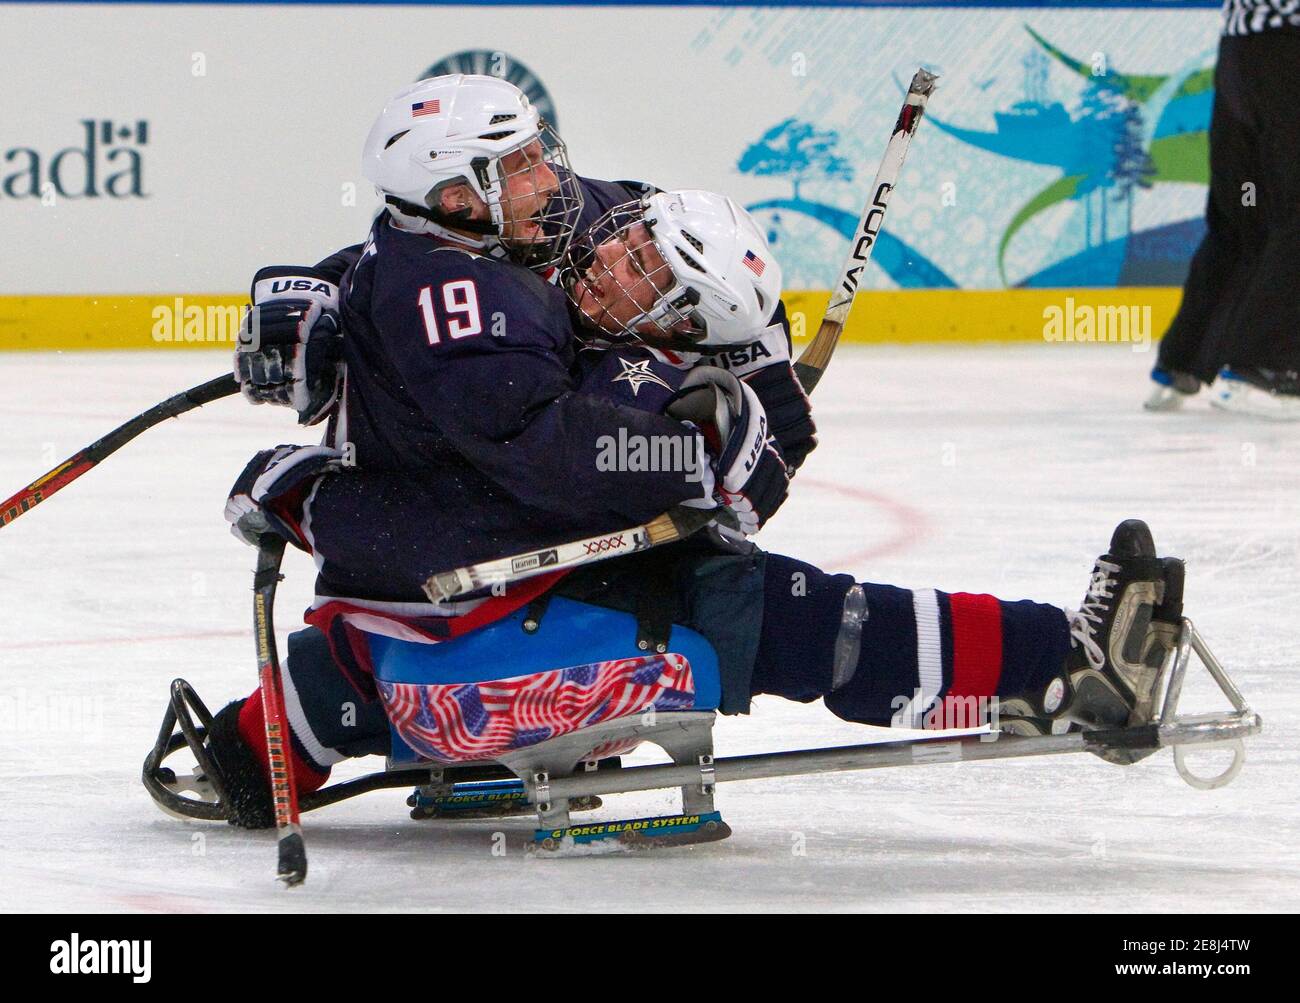 USA's Taylor Chace (L) and Andy Yohe celebrate winning the gold medal sledge hockey game against Japan at the 2010 Paralympic Winter Games in Vancouver, British Columbia, March 20, 2010.       REUTERS/Andy Clark        (CANADA - Tags: SPORT OLYMPICS ICE HOCKEY) Stock Photo